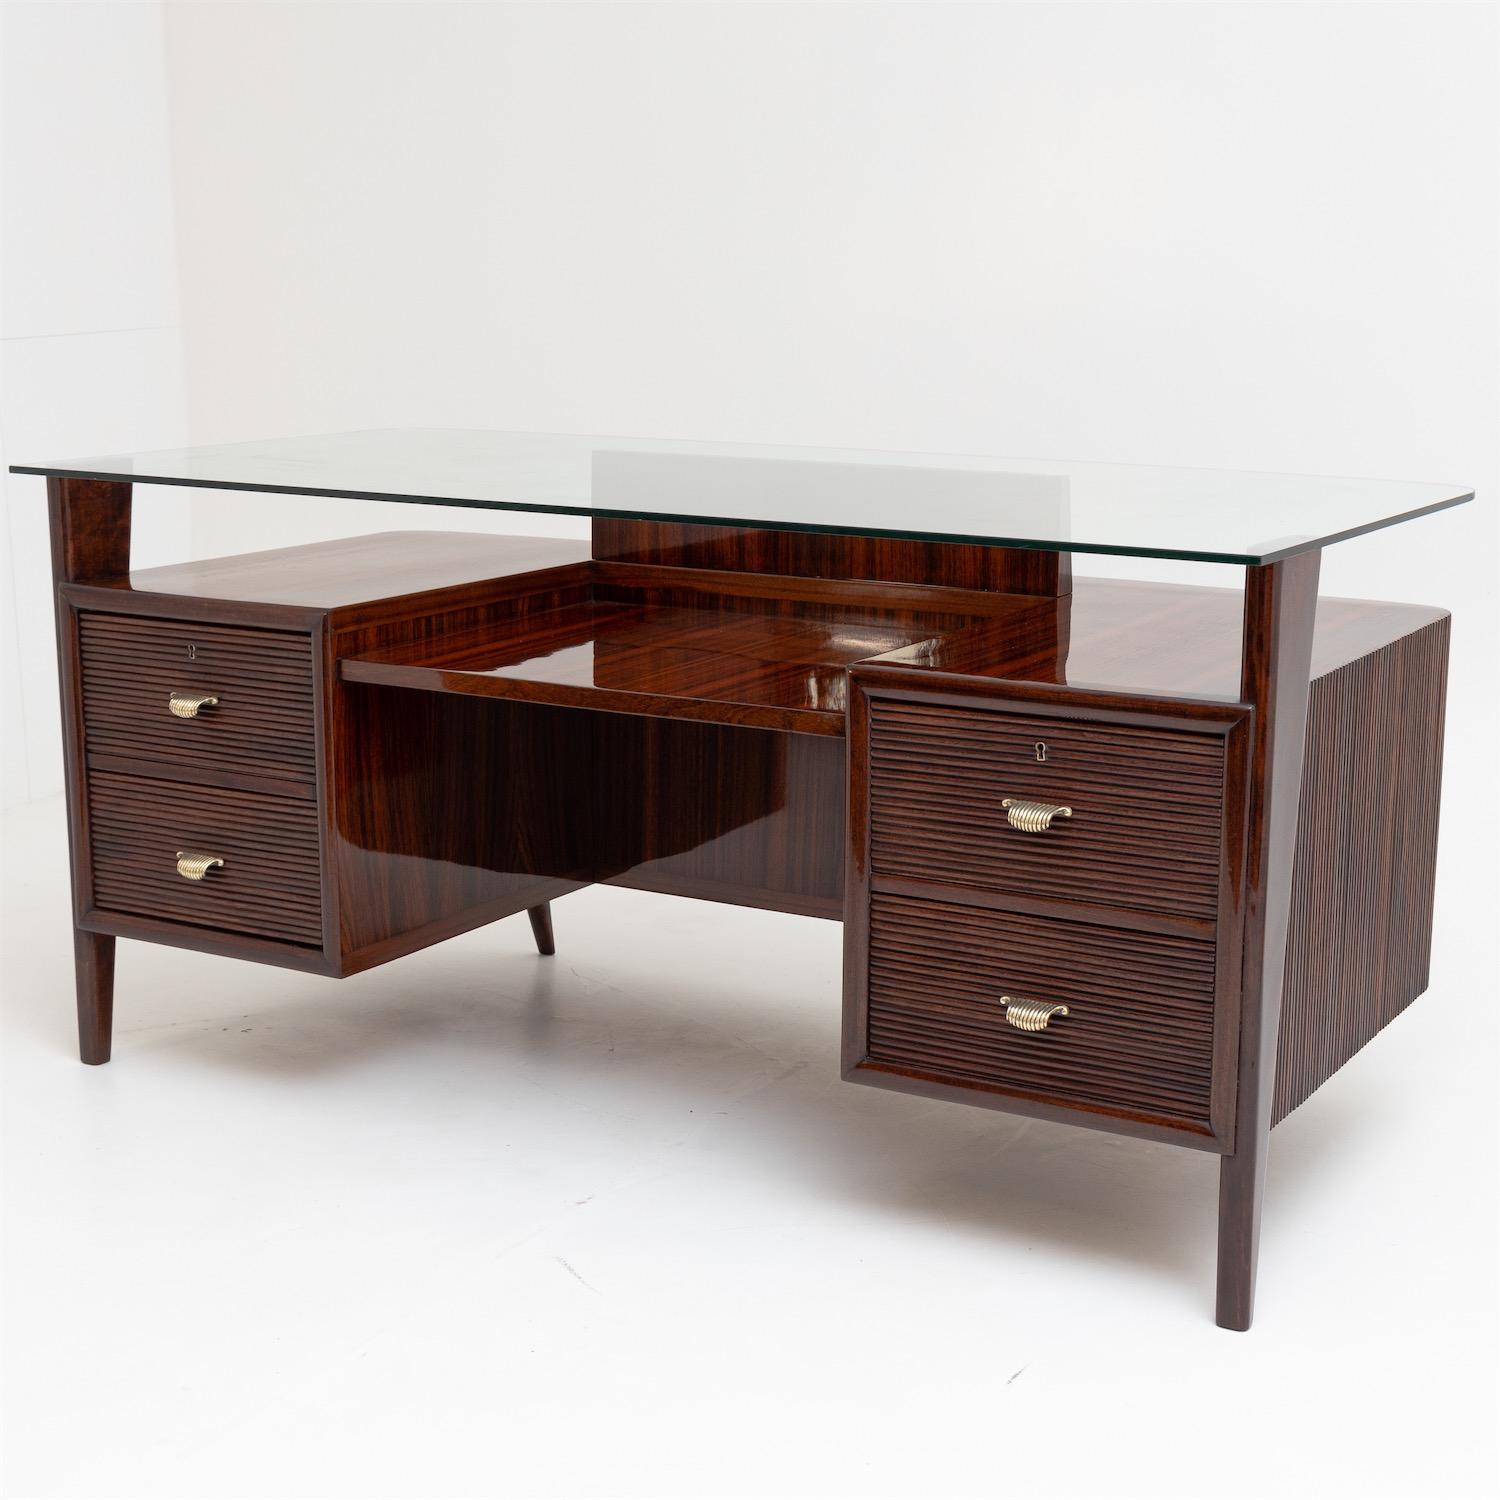 Large desk with D-shaped glass top and four drawers with brass handles. The surface of the back and the drawer fronts have vertical and horizontal ribbing respectively. The desk can be placed freely in the room and has been professionally restored.